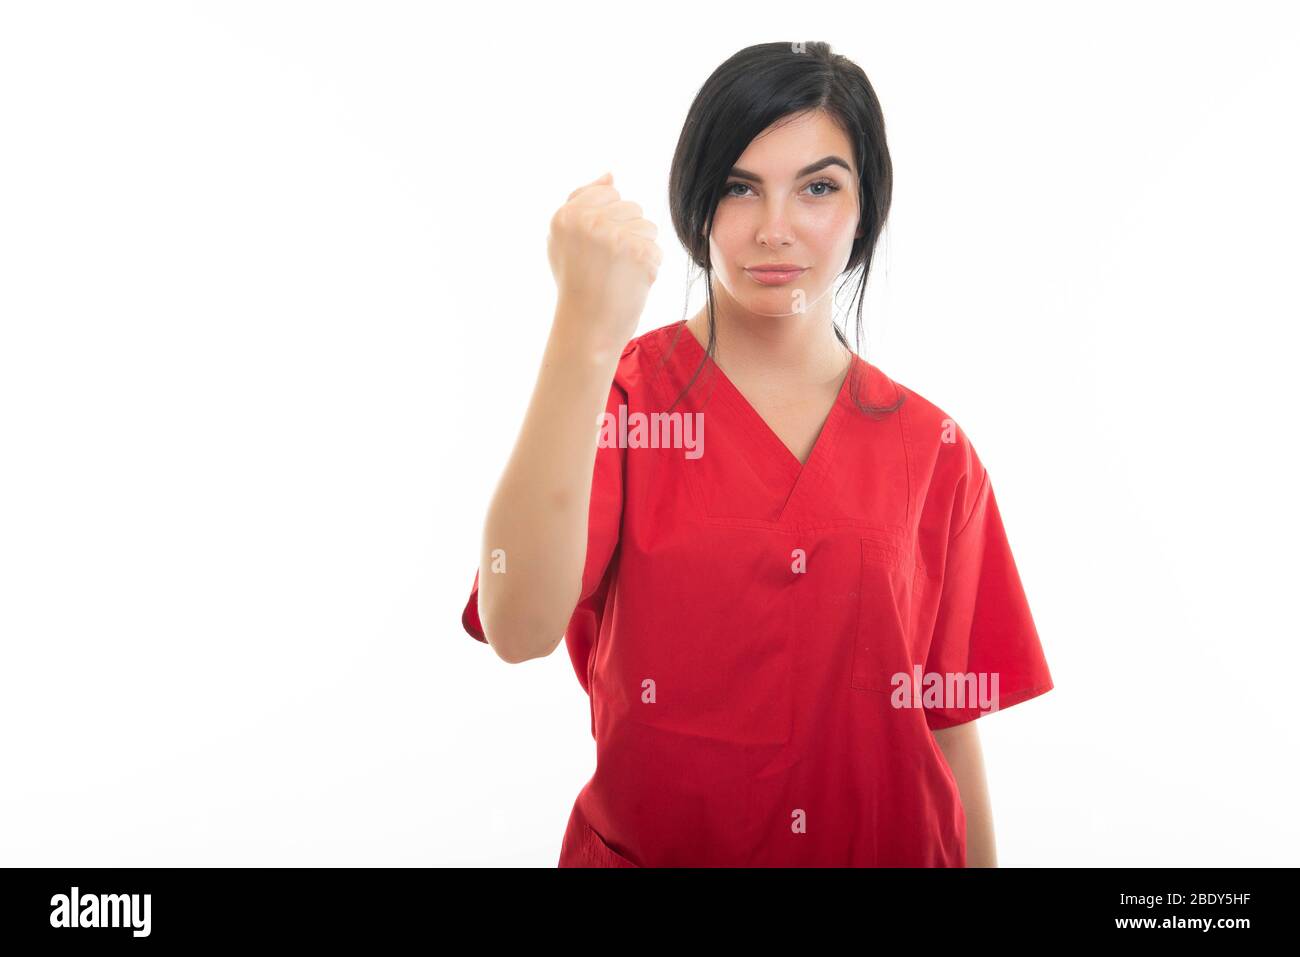 Portrait of young attractive female nurse showing fist like fighting isolated on white background with copy space advertising area Stock Photo